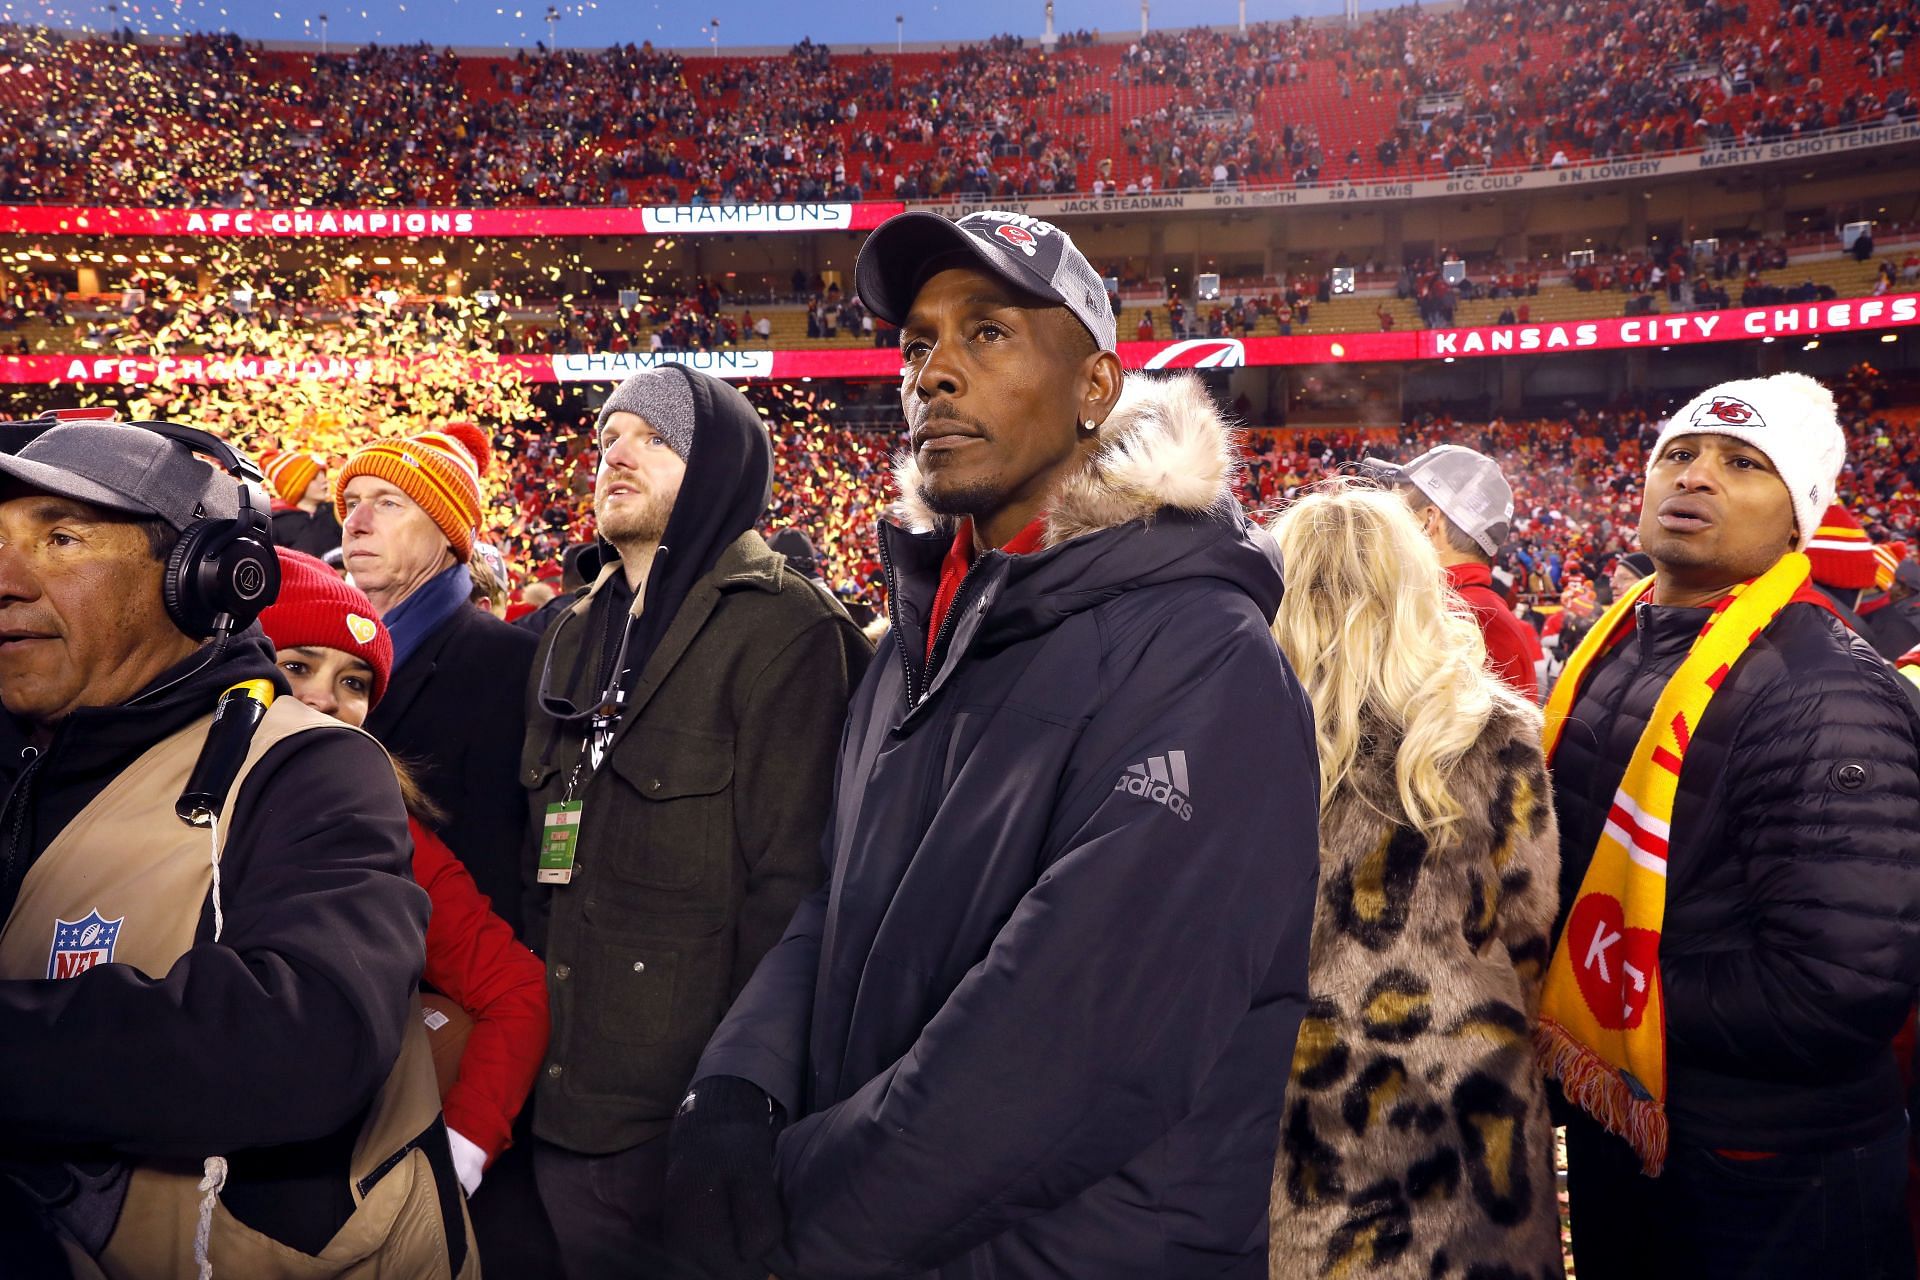 Patrick Mahomes father Pat Mahomes looks on after the Kansas City Chiefs defeated the Tennessee Titans in the AFC Championship Game at Arrowhead Stadium